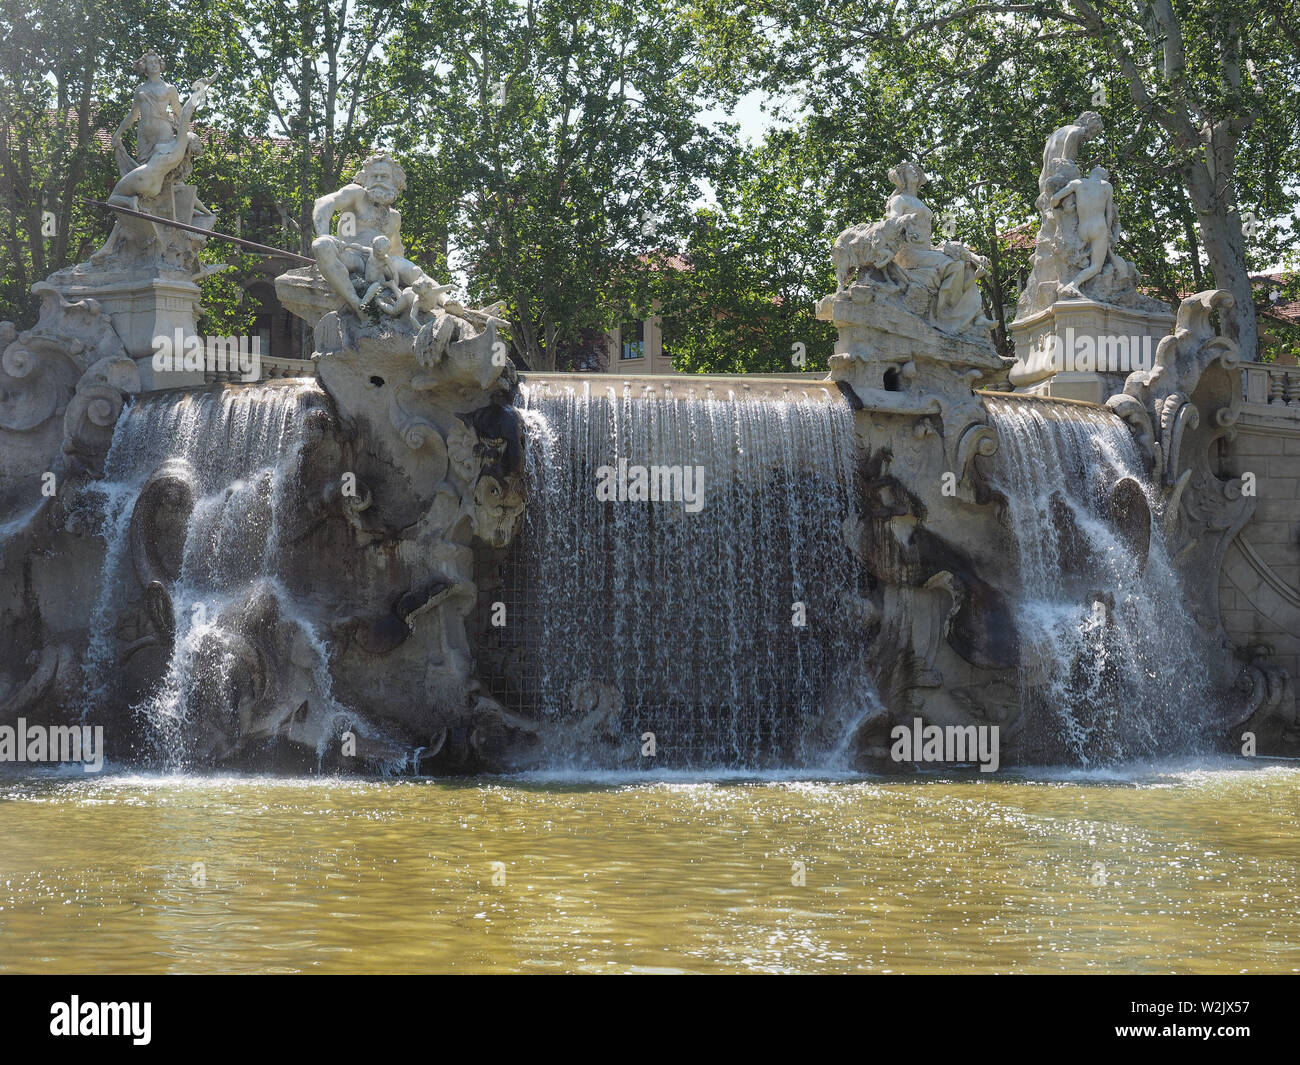 Fontana dei Mesi (meaning Fountain of Months) in Parco del Valentino park  in Turin, Italy Stock Photo - Alamy